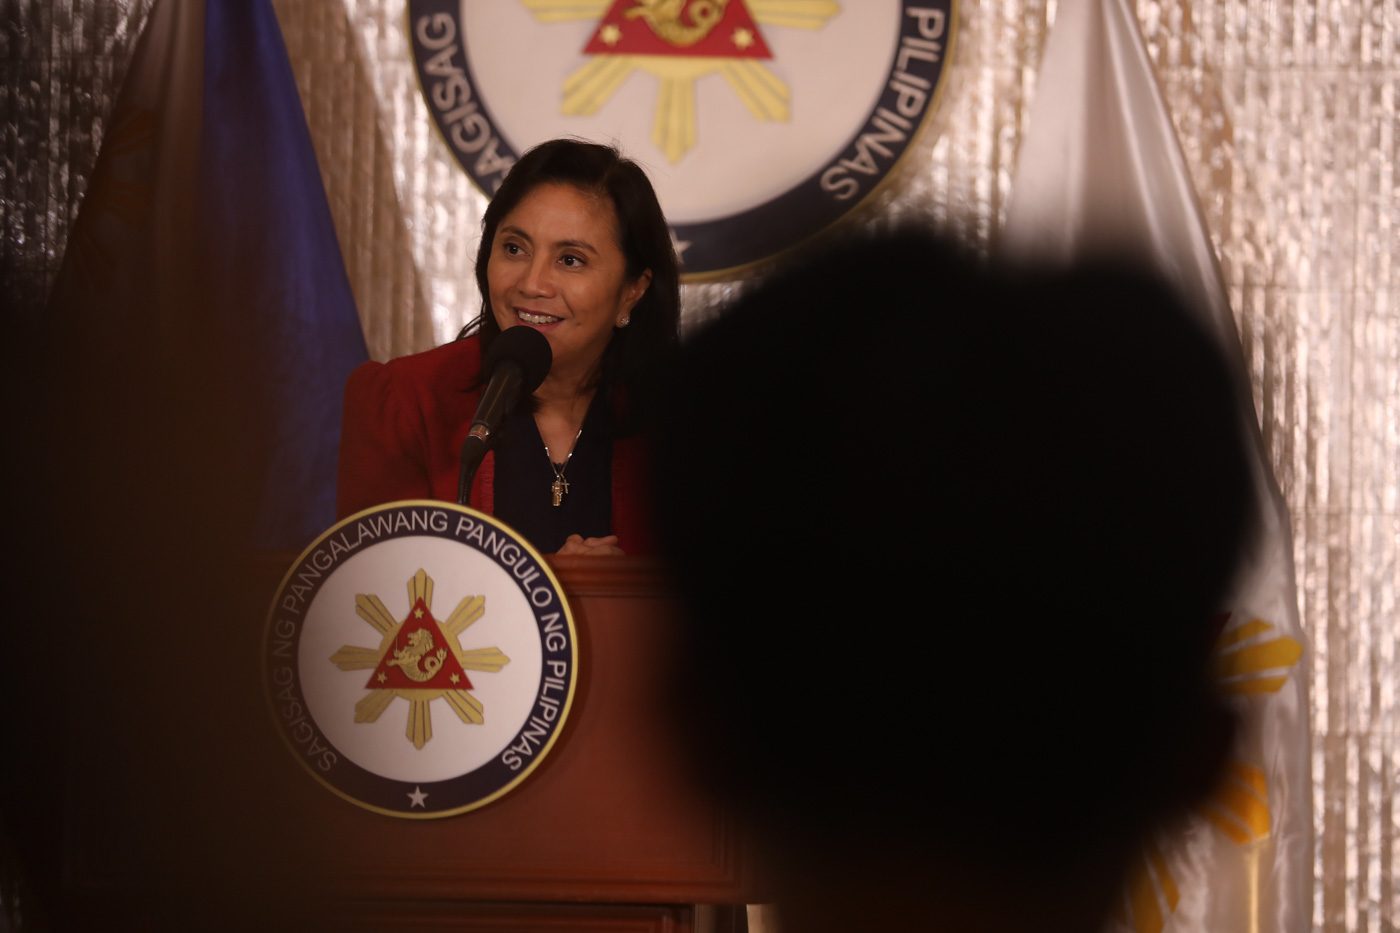 Robredo on 15,000 more votes over Marcos: ‘This proves who was lying’